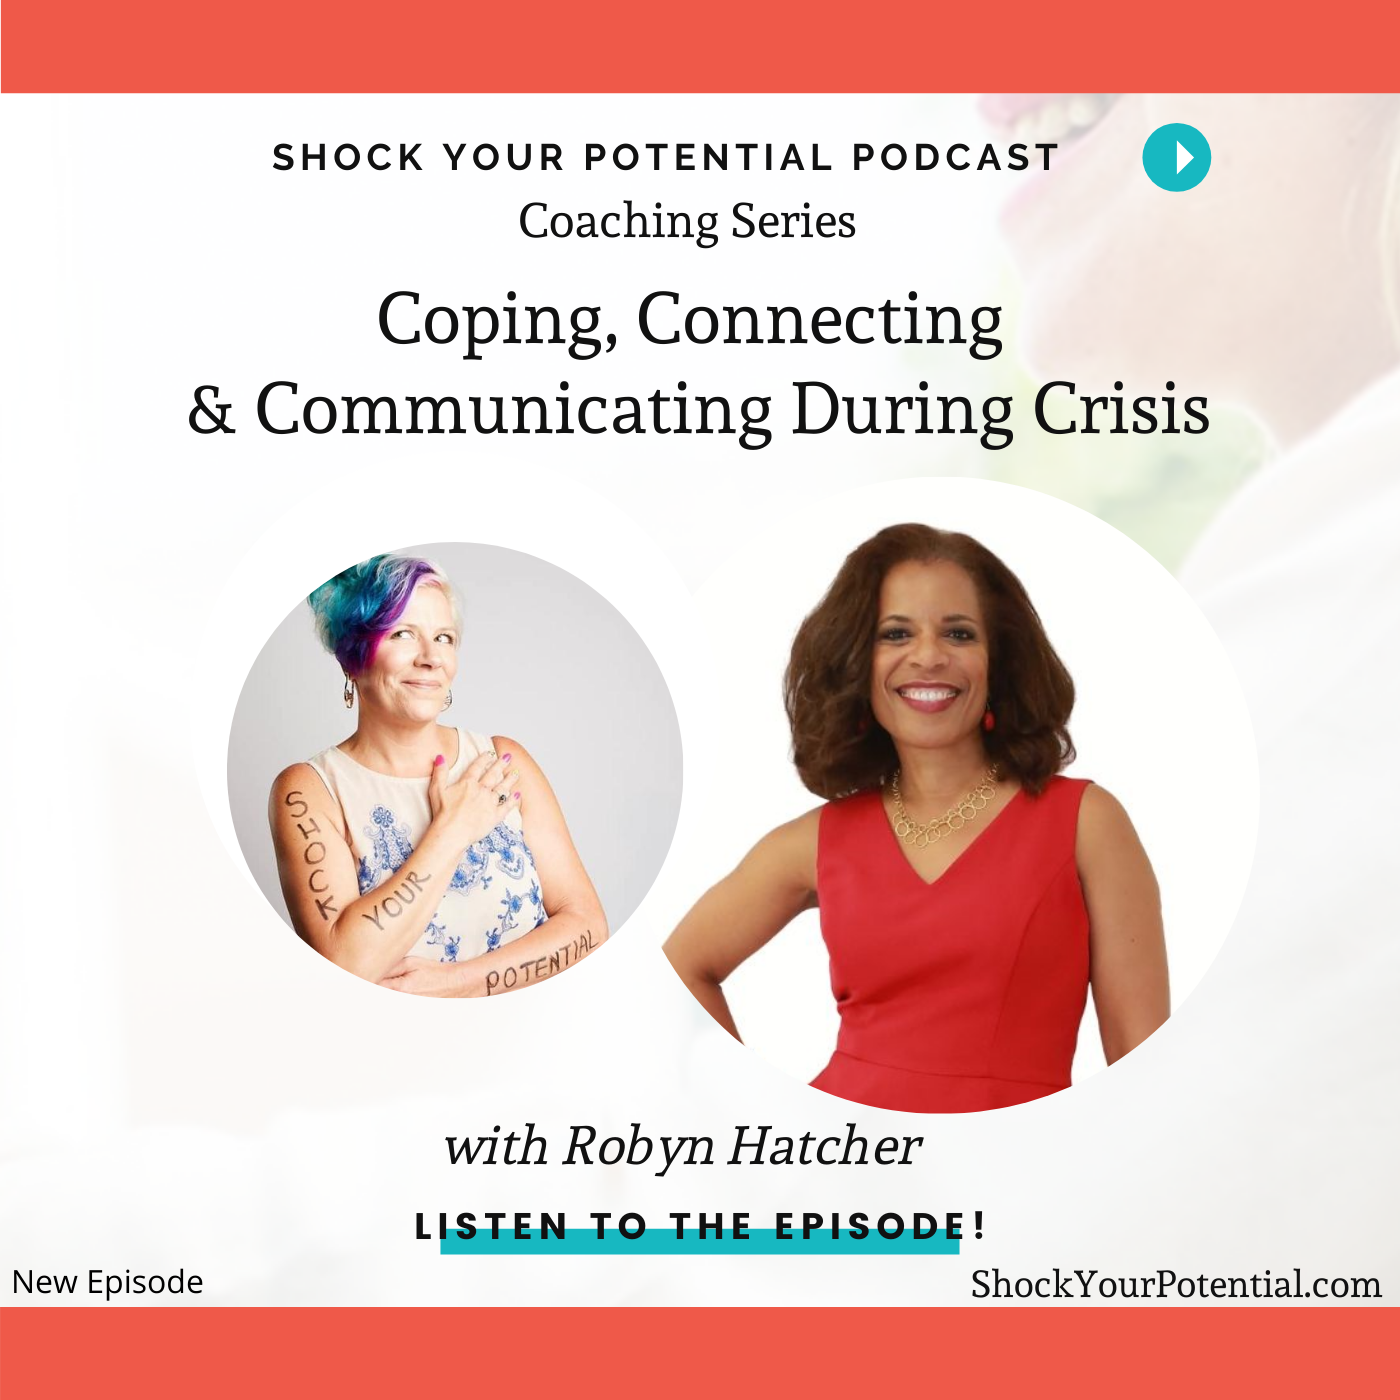 Coping, Connecting & Communicating During Crisis – Robyn Hatcher